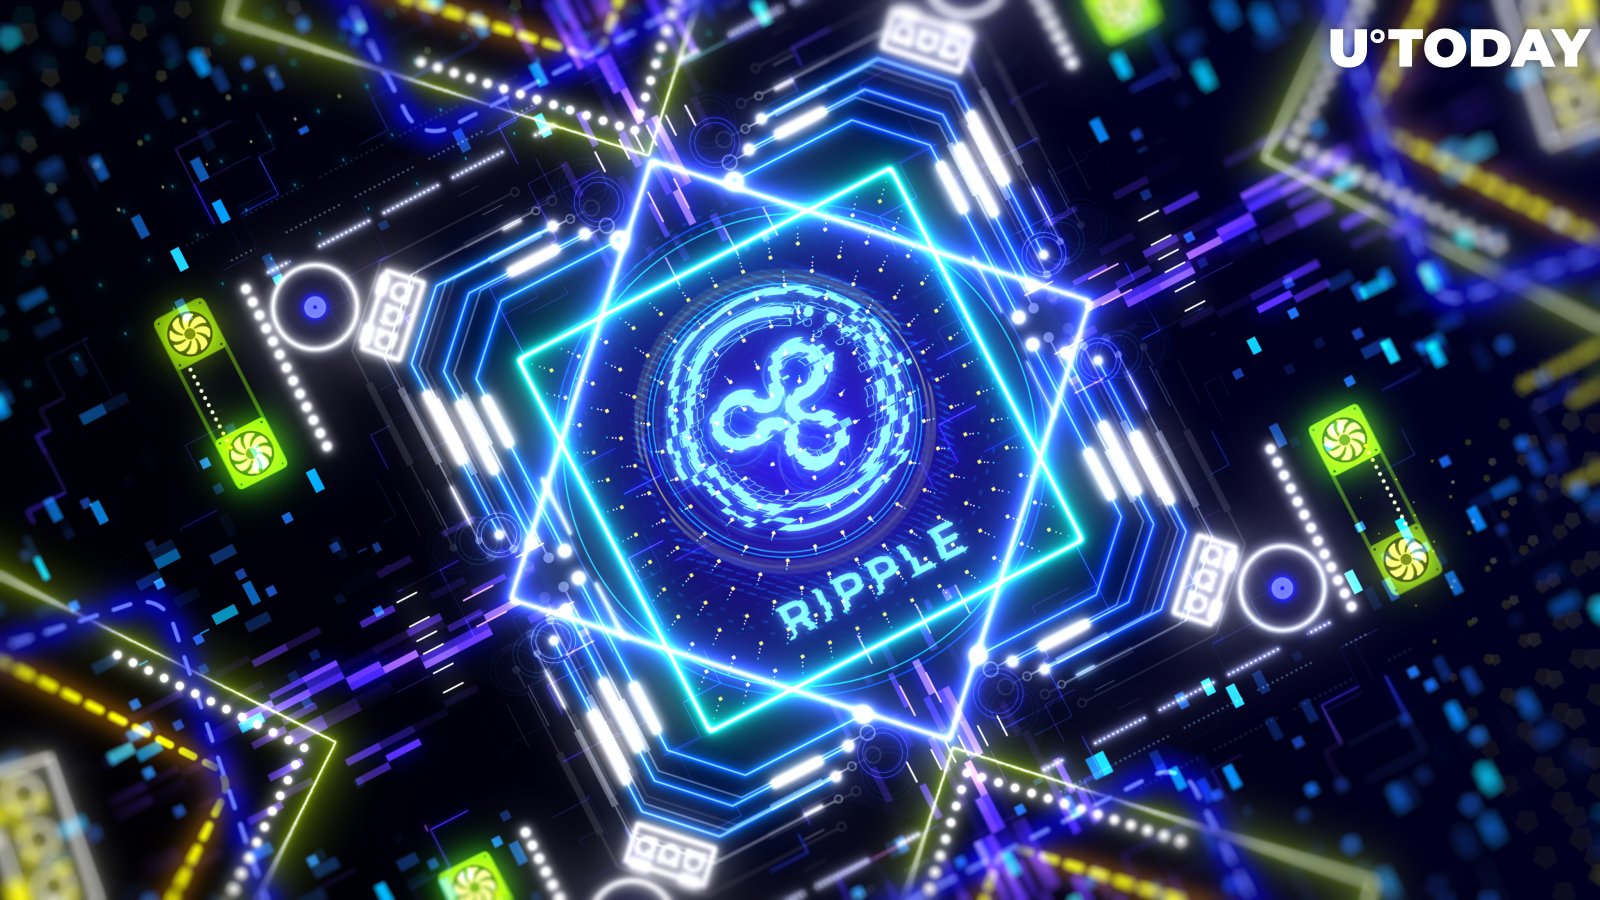 Ripple Granted System and Organization Controls 2 Certification, Here's What It Means